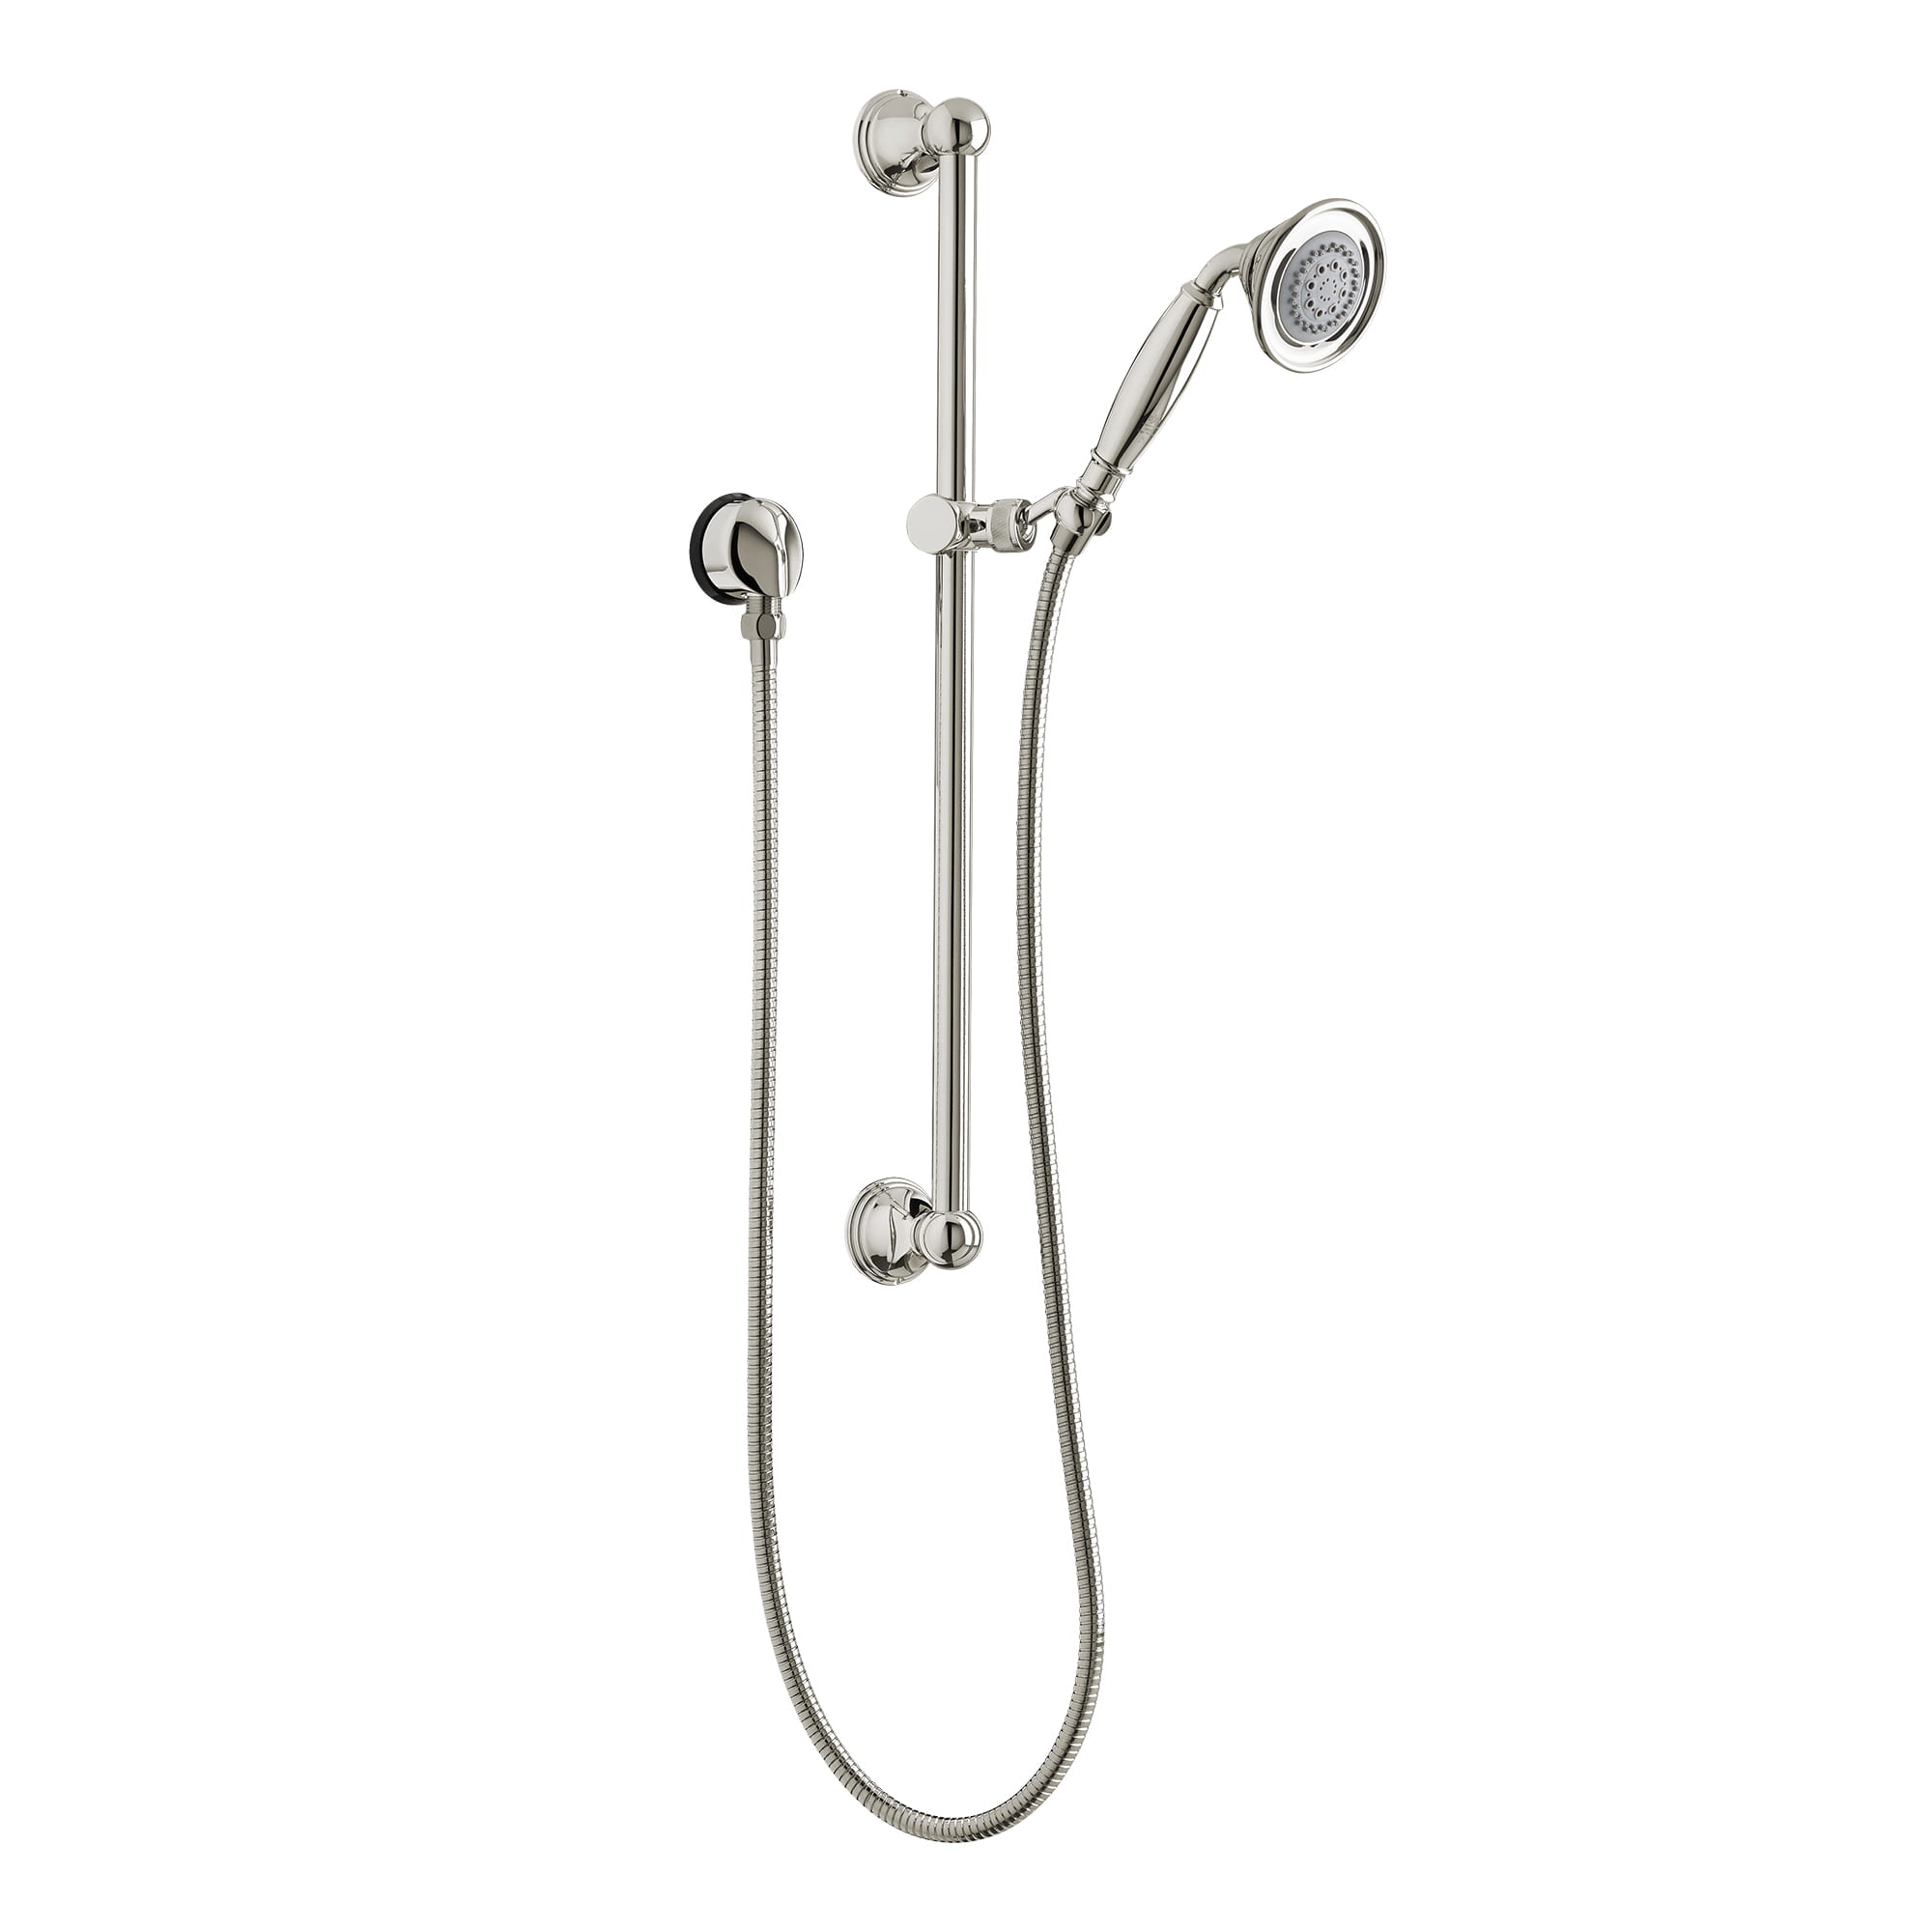 Ashbee Personal Shower Set with 2.0 gpm Hand Shower